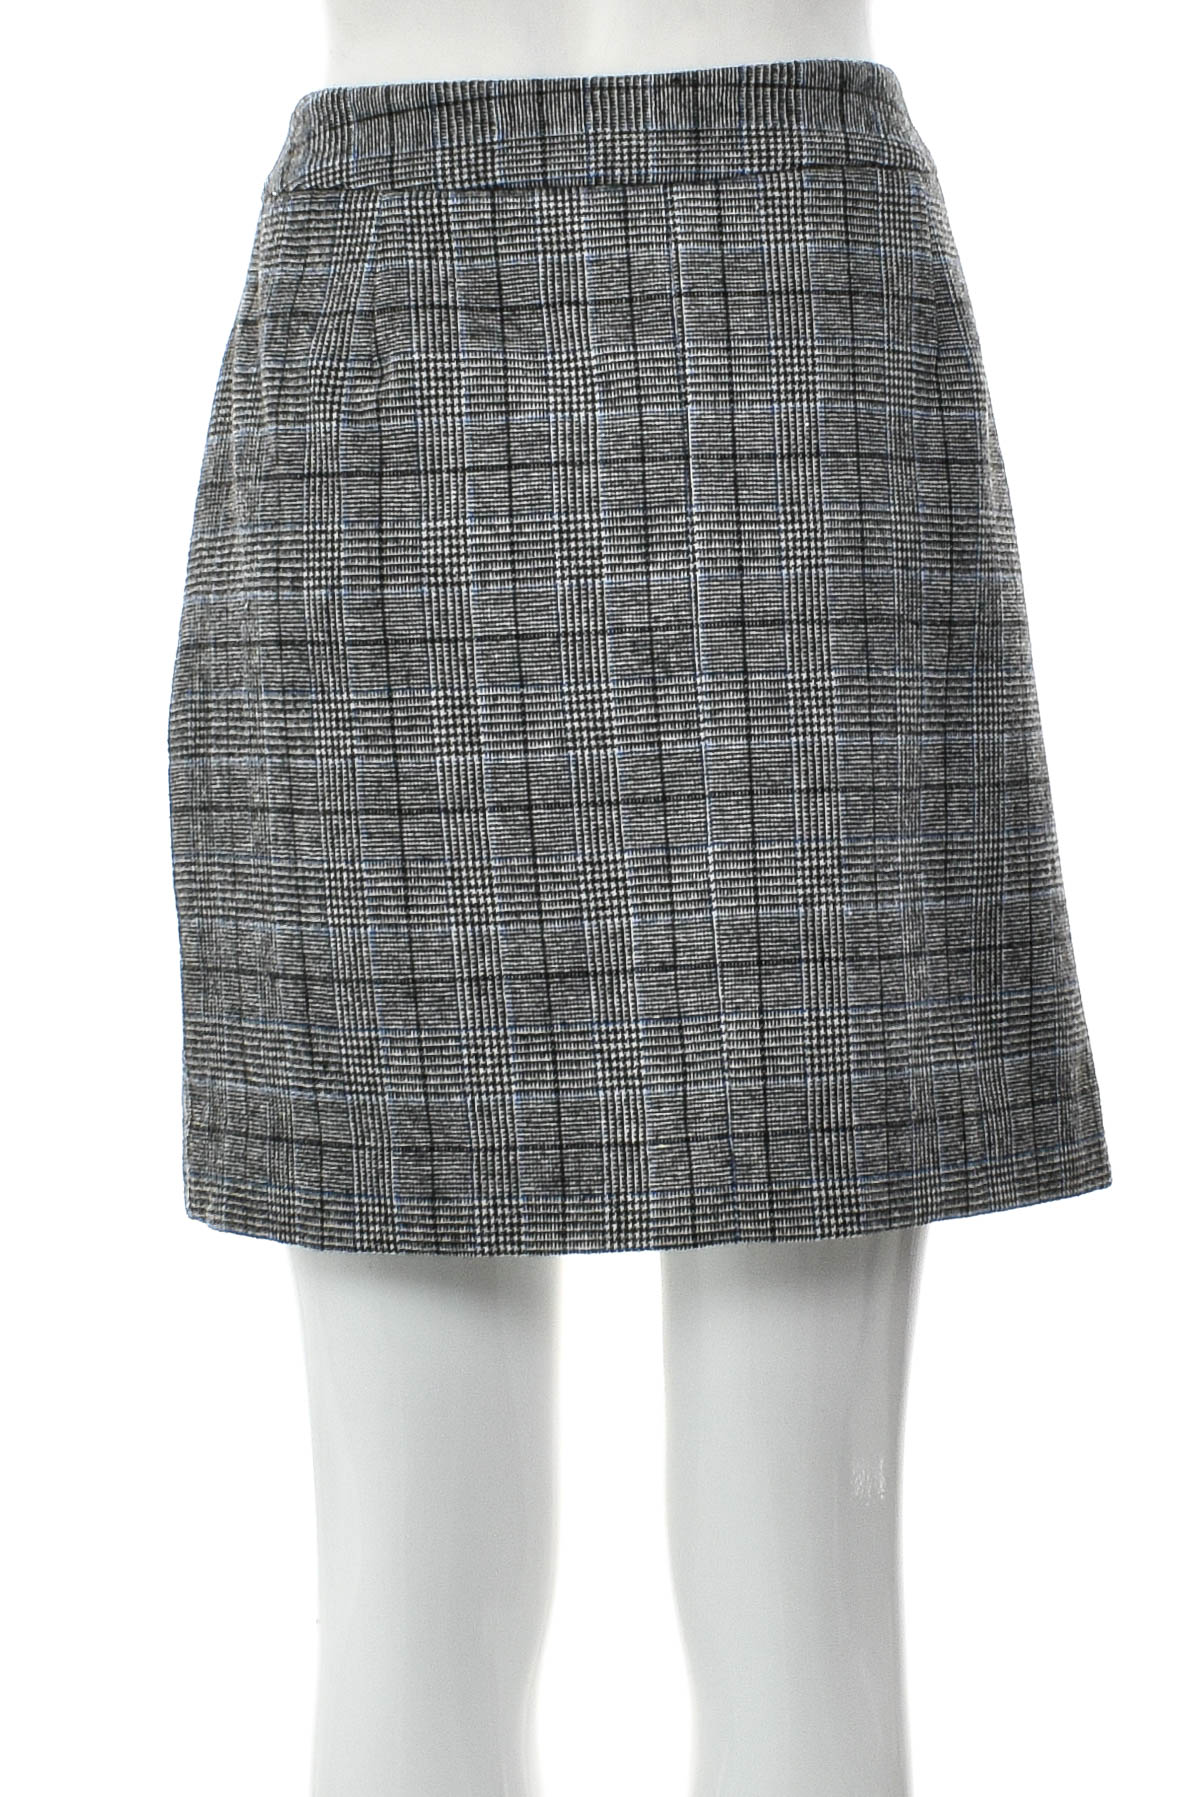 Skirt - M&S COLLECTION - 1